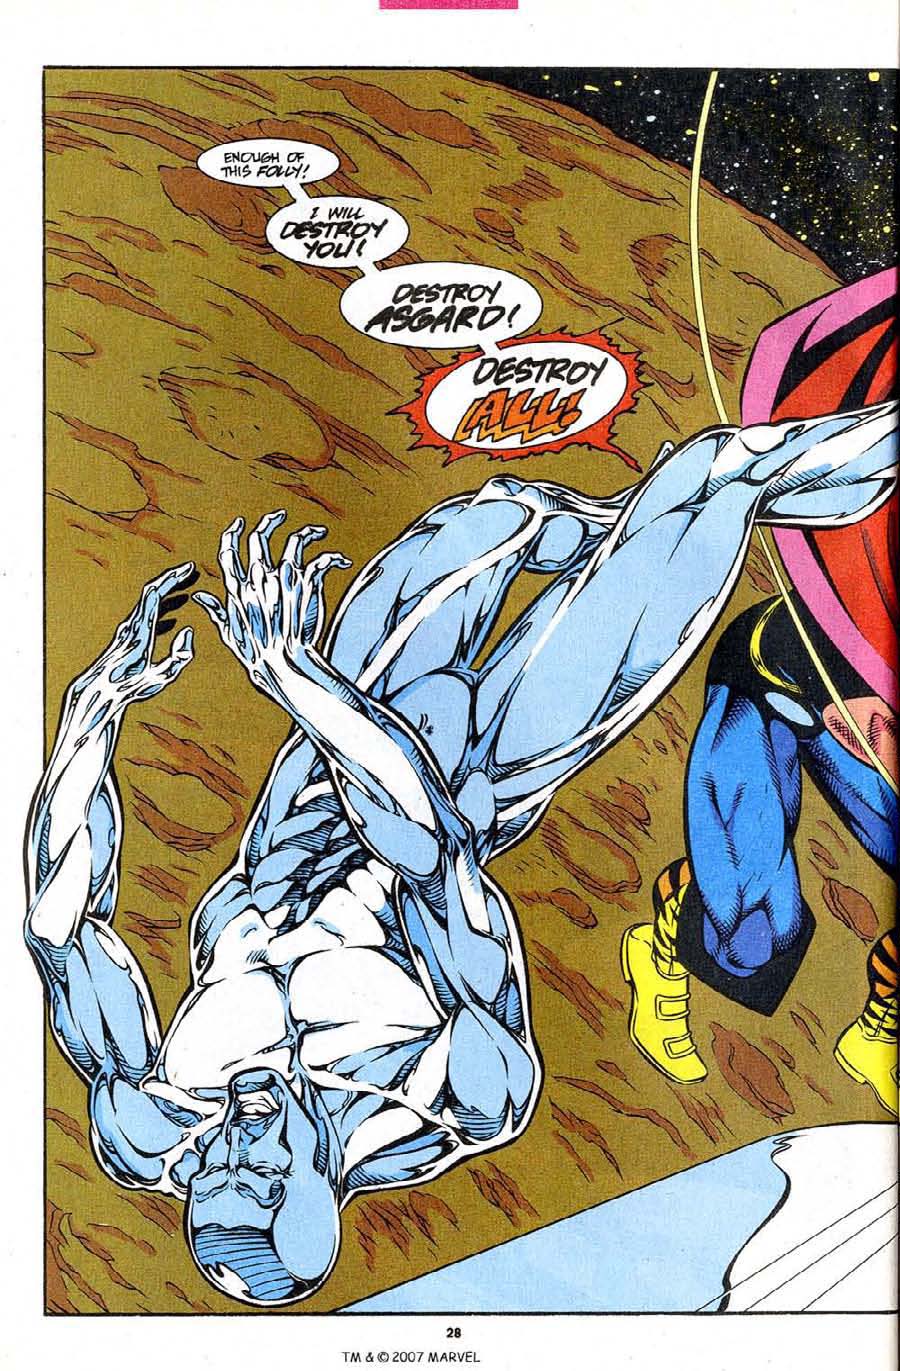 In 'Silver Surfer' (1993) #3, Warrior Madness Thor knocks out Silver Surfer at full power with a hammer strike.